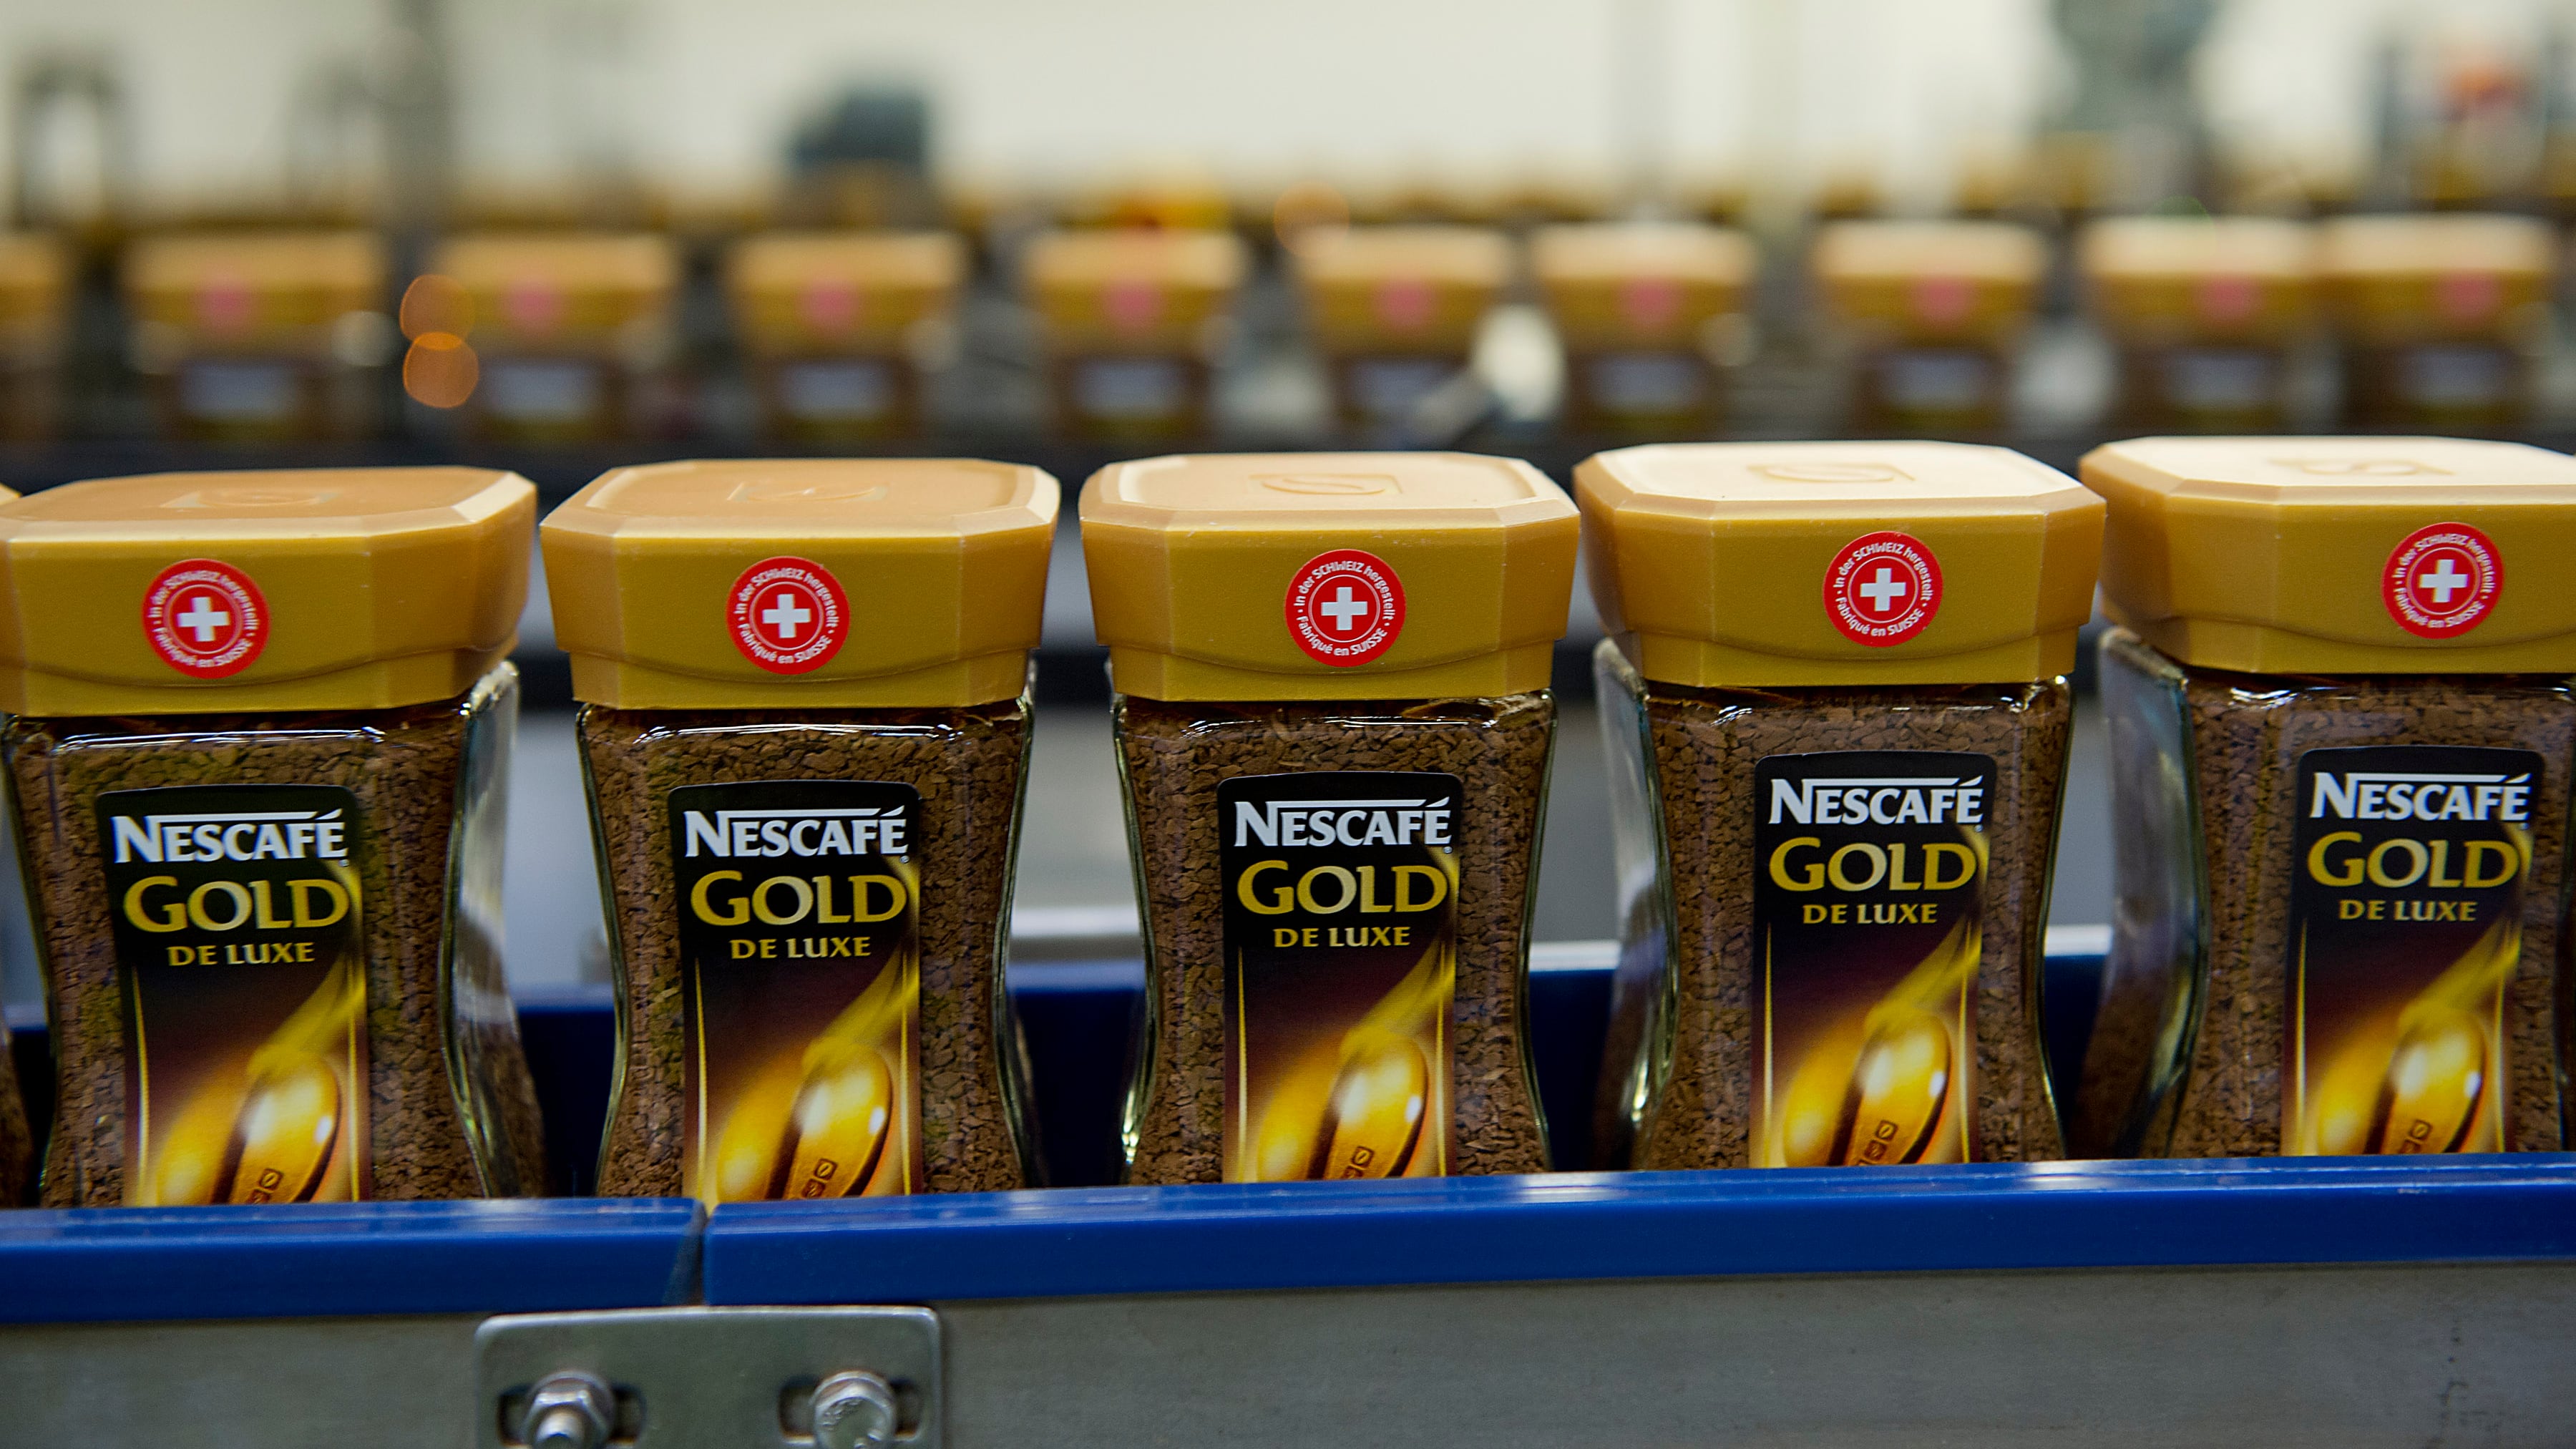 Nestle has seen its sales slow in recent months